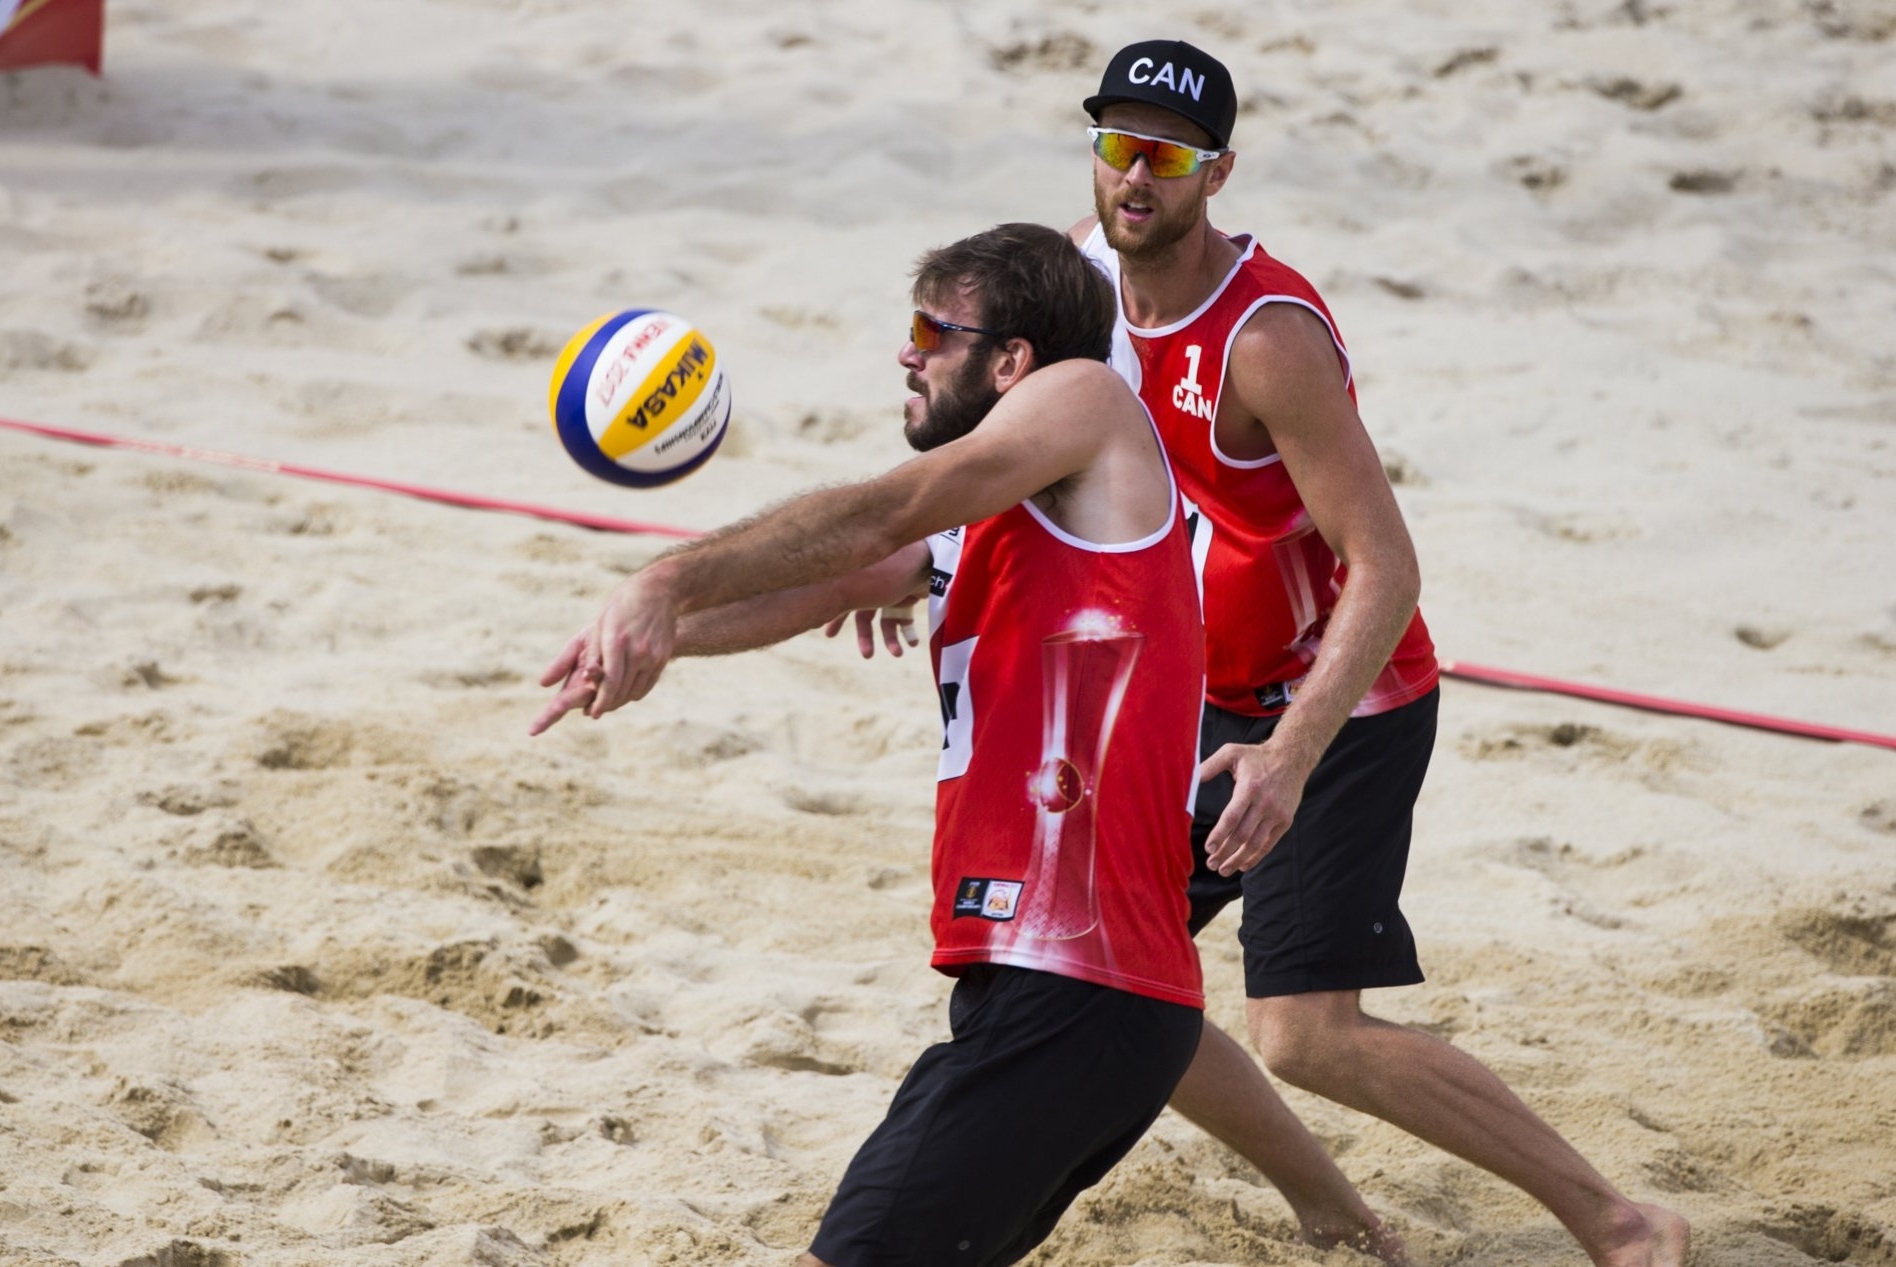 Ben Saxton and partner Chaim Schalk finished fourth in last year's World Tour Finals on home soil in Toronto